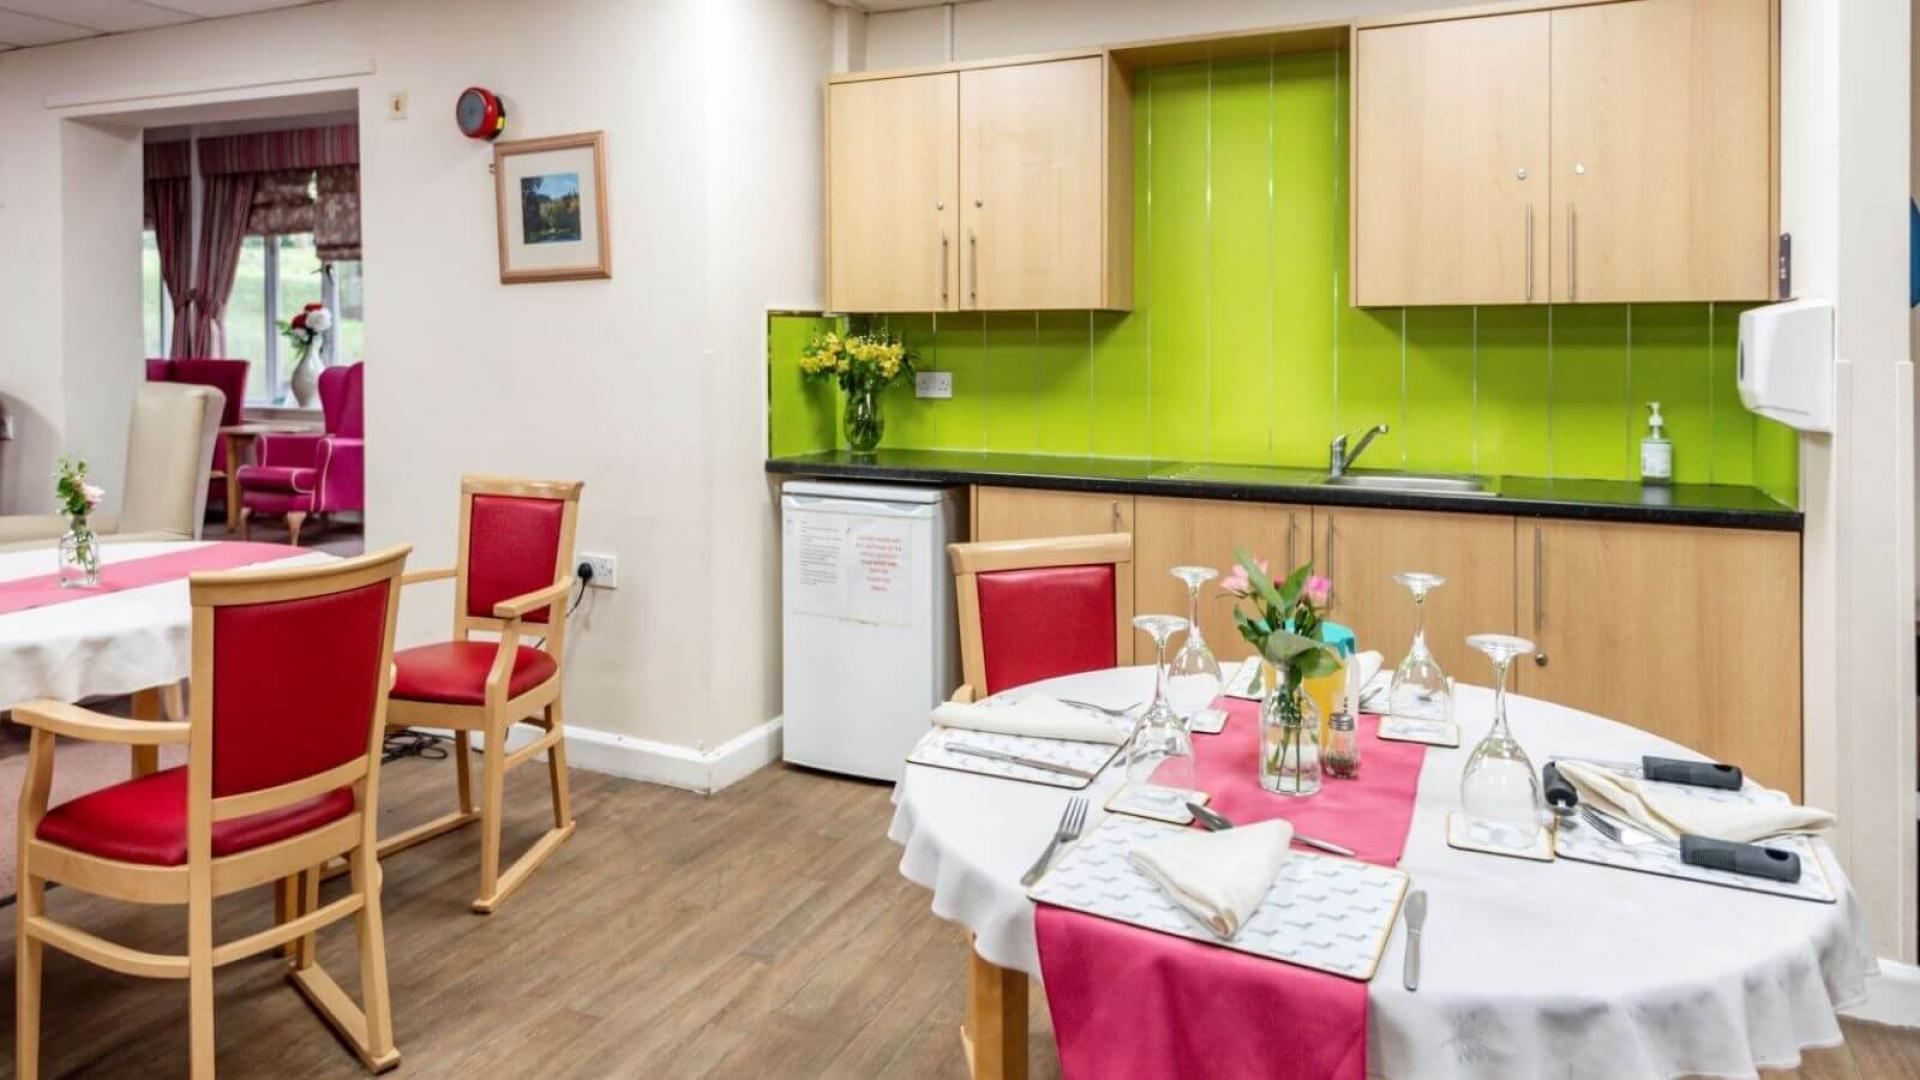 Kitching and dining room at Eckington Court Nursing Home in North Derbyshire 